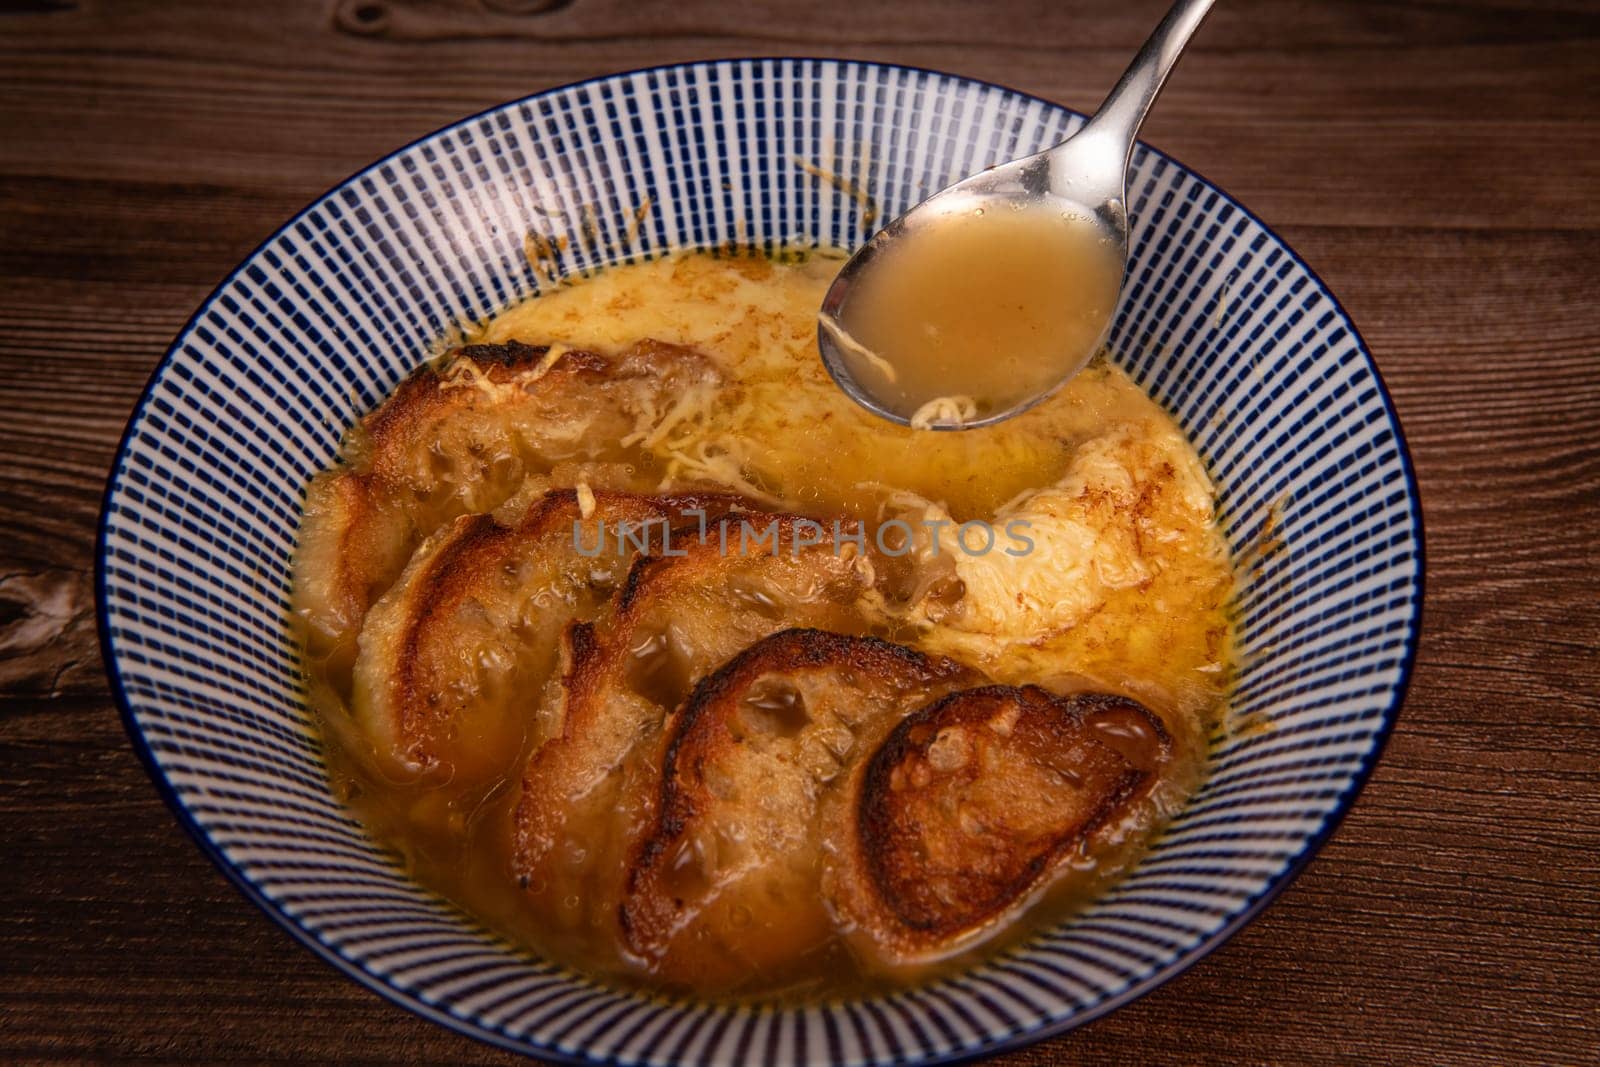 Classic French onion soup baked with cheese croutons sprinkled with fresh thyme, close up view, High quality photo